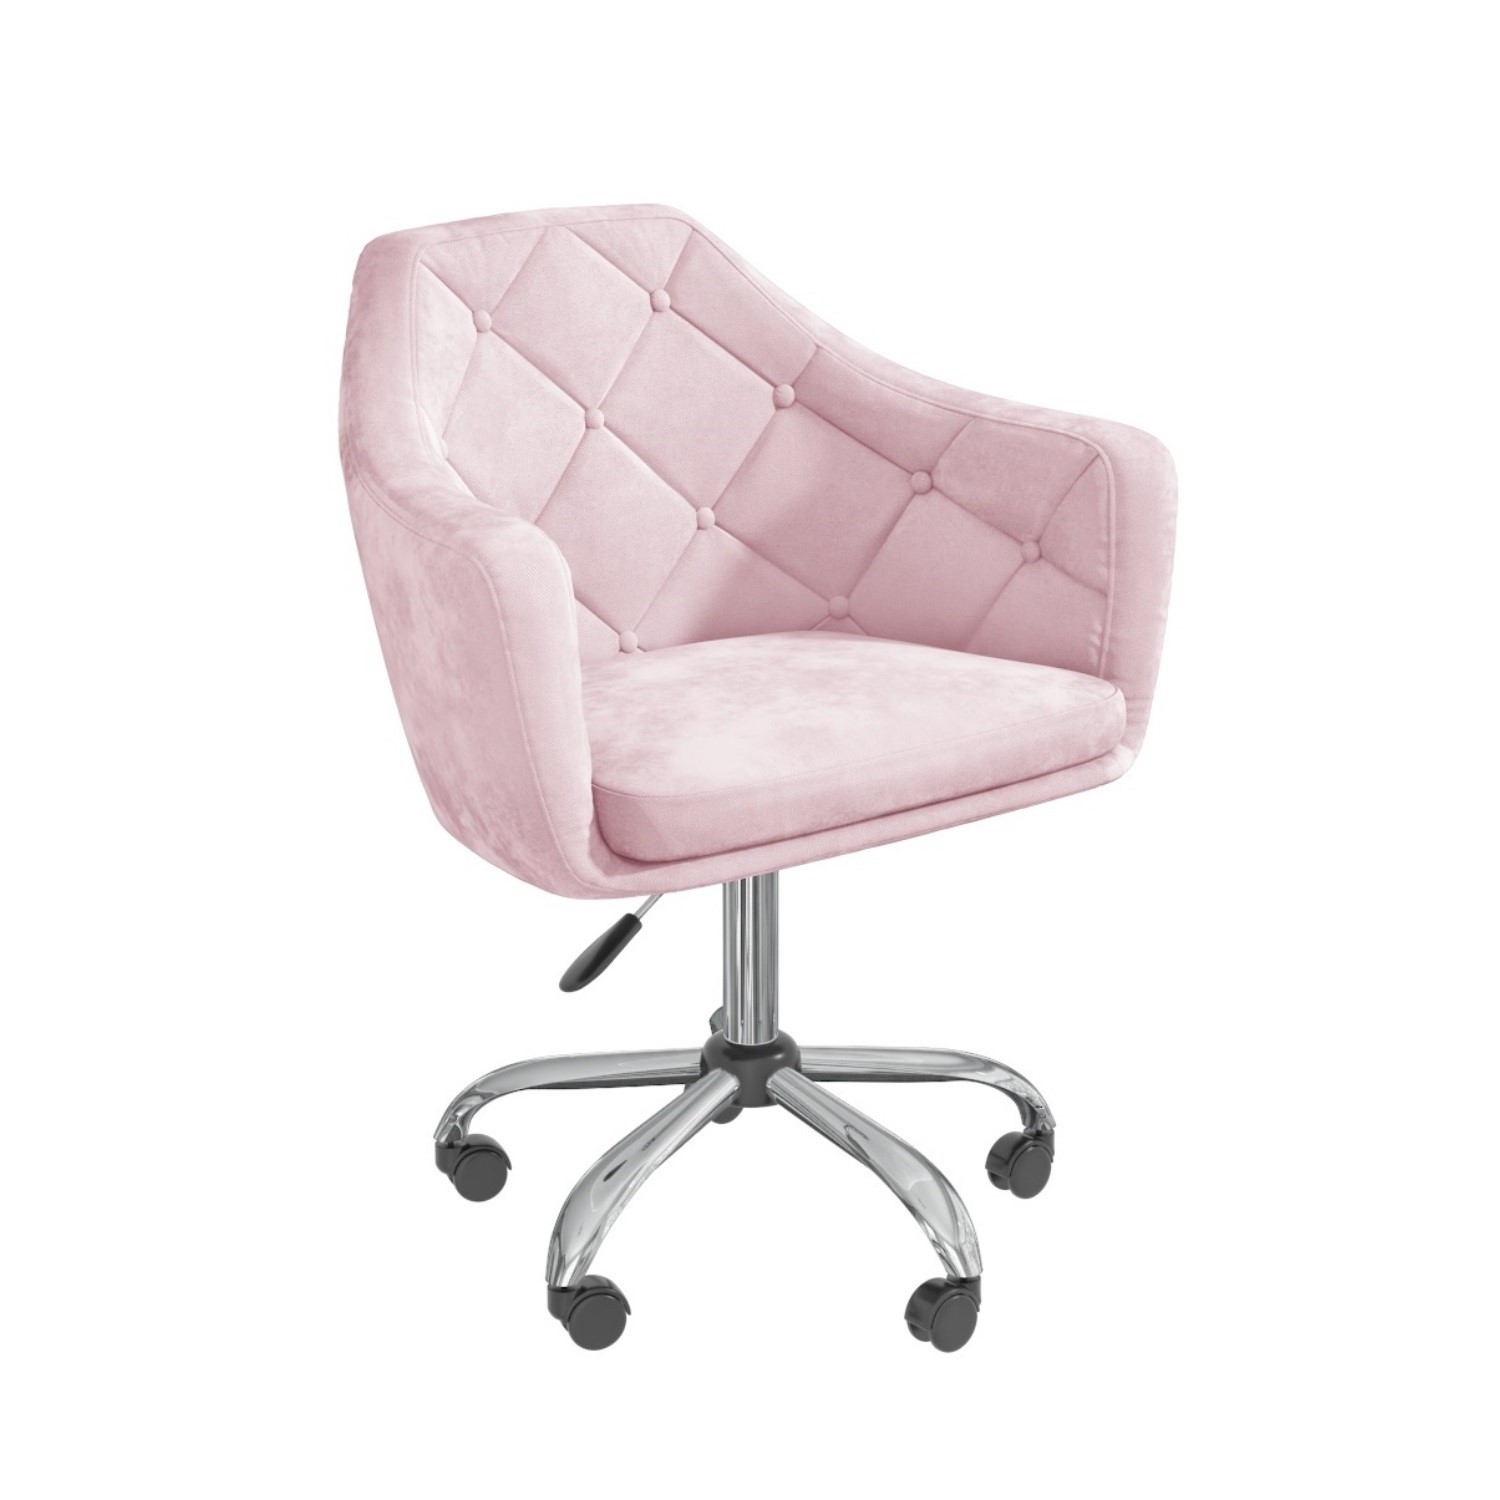 Pink Velvet Office Swivel Chair With Button Back Marley Furniture123